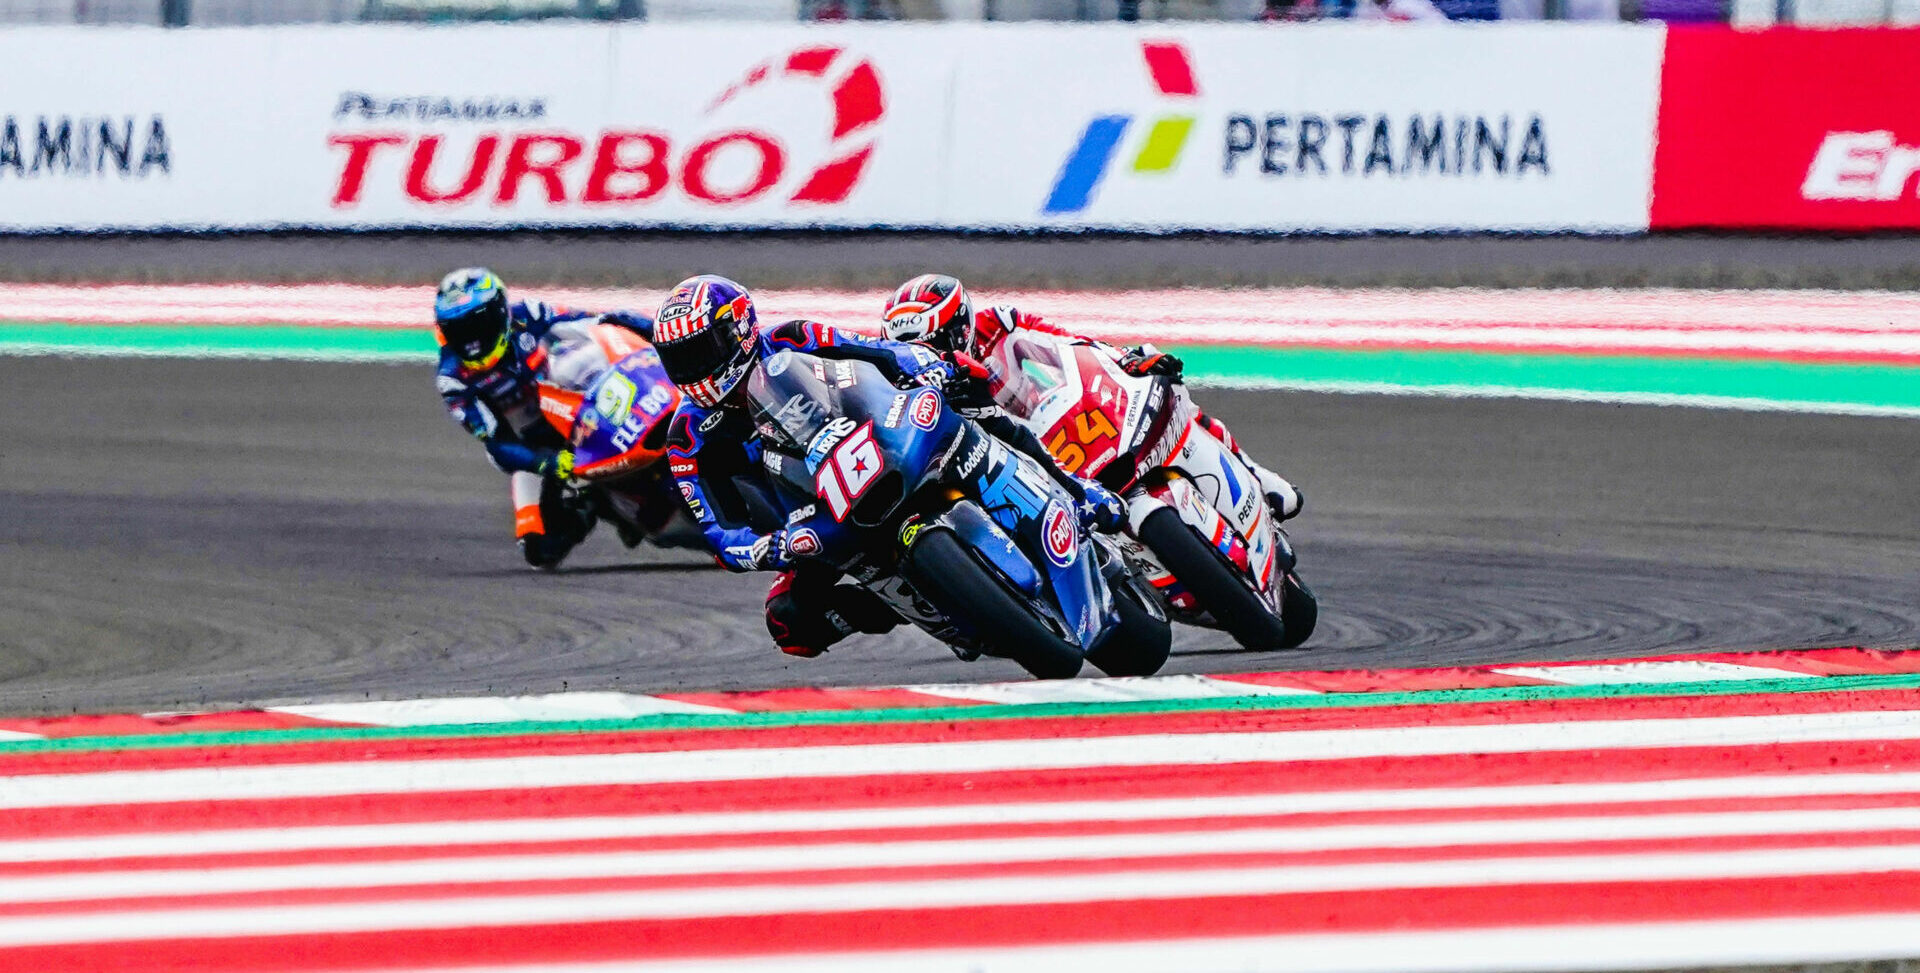 Joe Roberts (16) leads Bo Bendsneyder (64) and Jorge Navarro (9) during the Moto2 race in Indonesia. Photo courtesy Italtrans Racing.